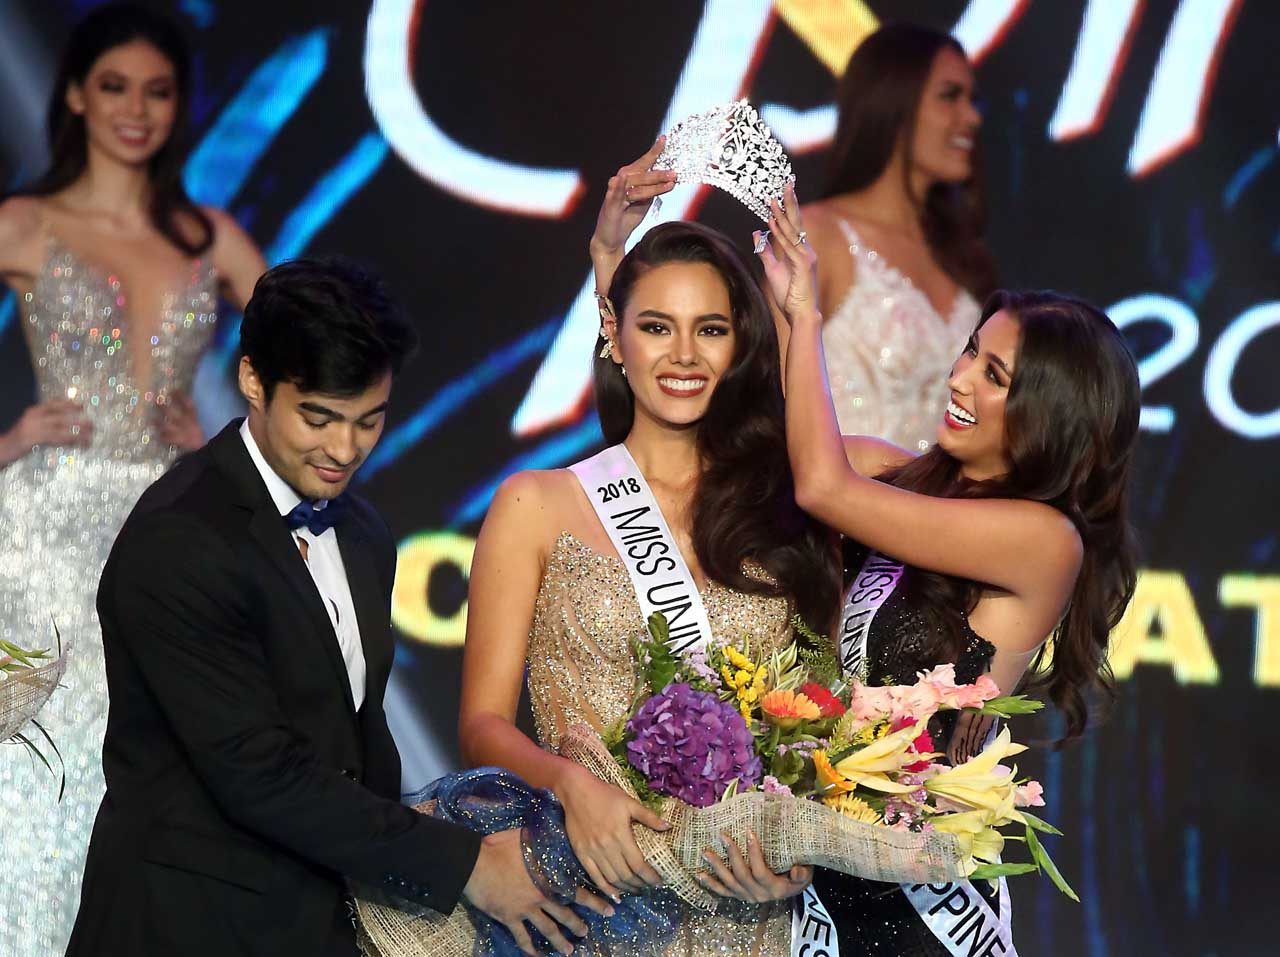 From Miss World Philippines 2016 to Miss Universe Philippines 2018: The journey of Catriona Gray